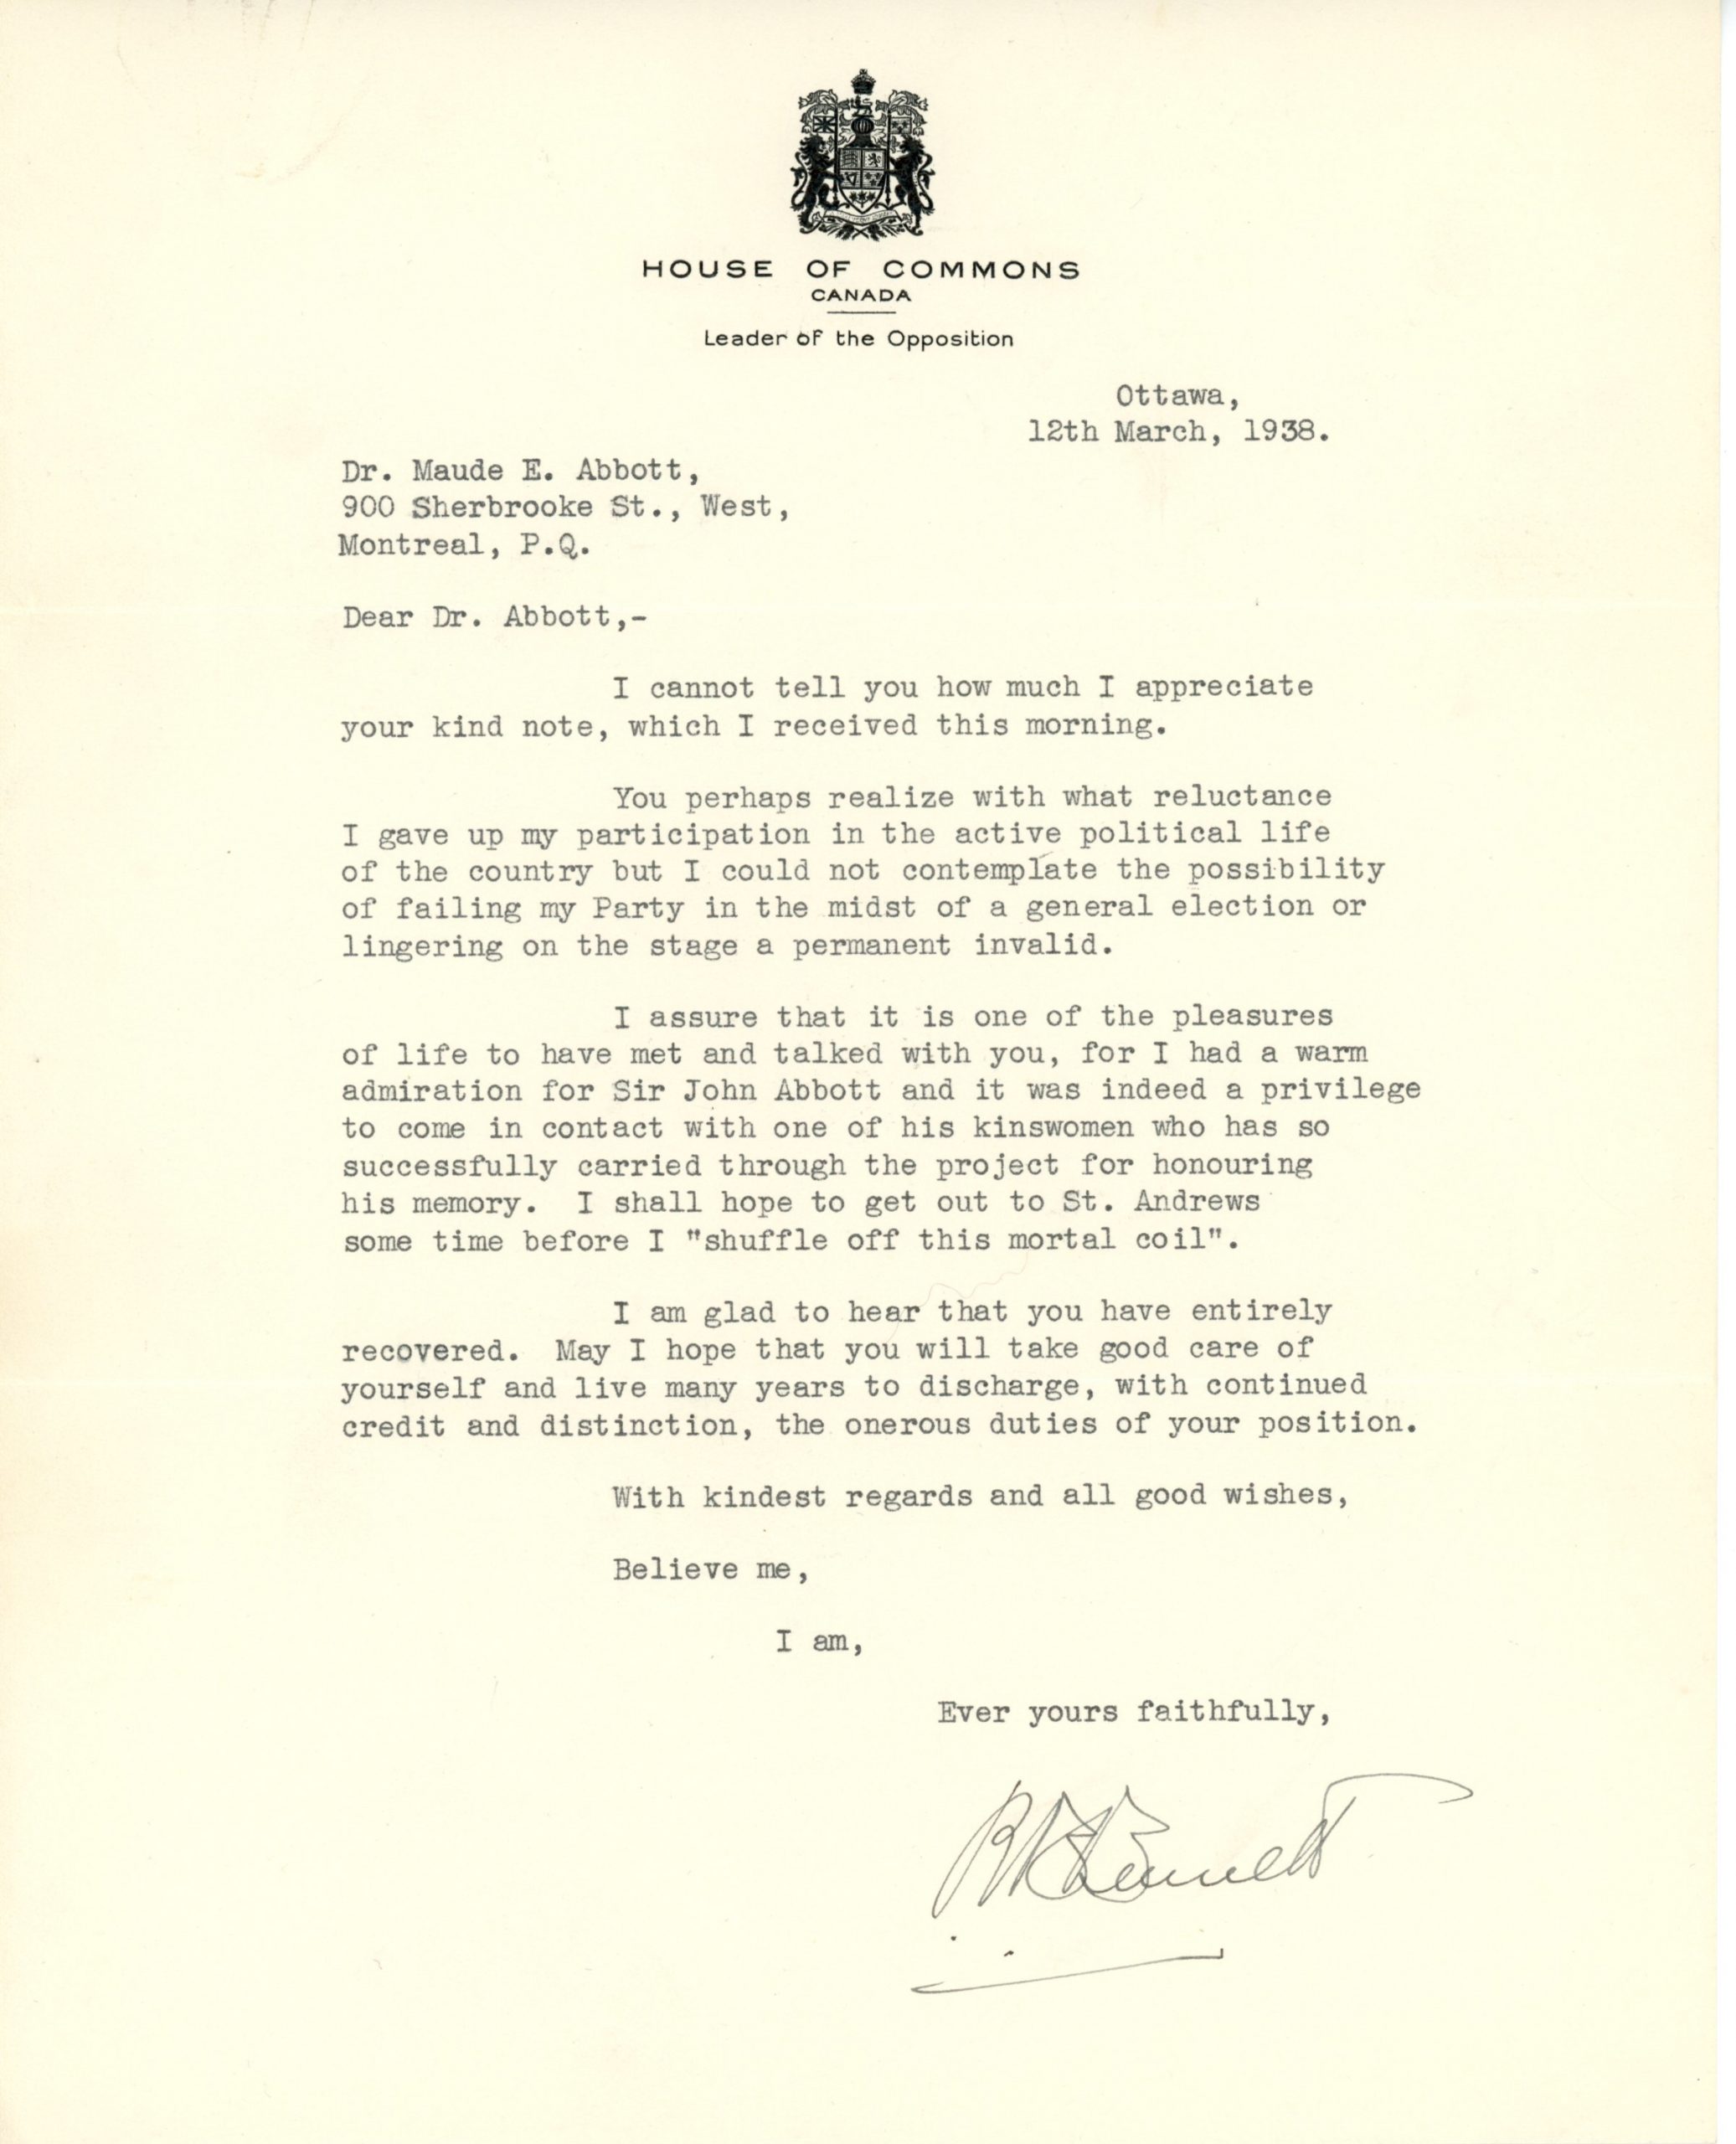 Typed letter from former prime minister R. B. Bennet to Maude Abbott, dated March 12, 1938, black ink on sepia paper. The letterhead displays the Arms of Canada, under which is written “House of Commons – Canada – Leader of the Opposition”. Bennet announces that he is withdrawing from politics and informs her that it was a pleasure for him to have met and talked with her. He wishes her a speedy recovery and sends her his best wishes. The letter is signed “R. B. Bennett” in the bottom right corner.